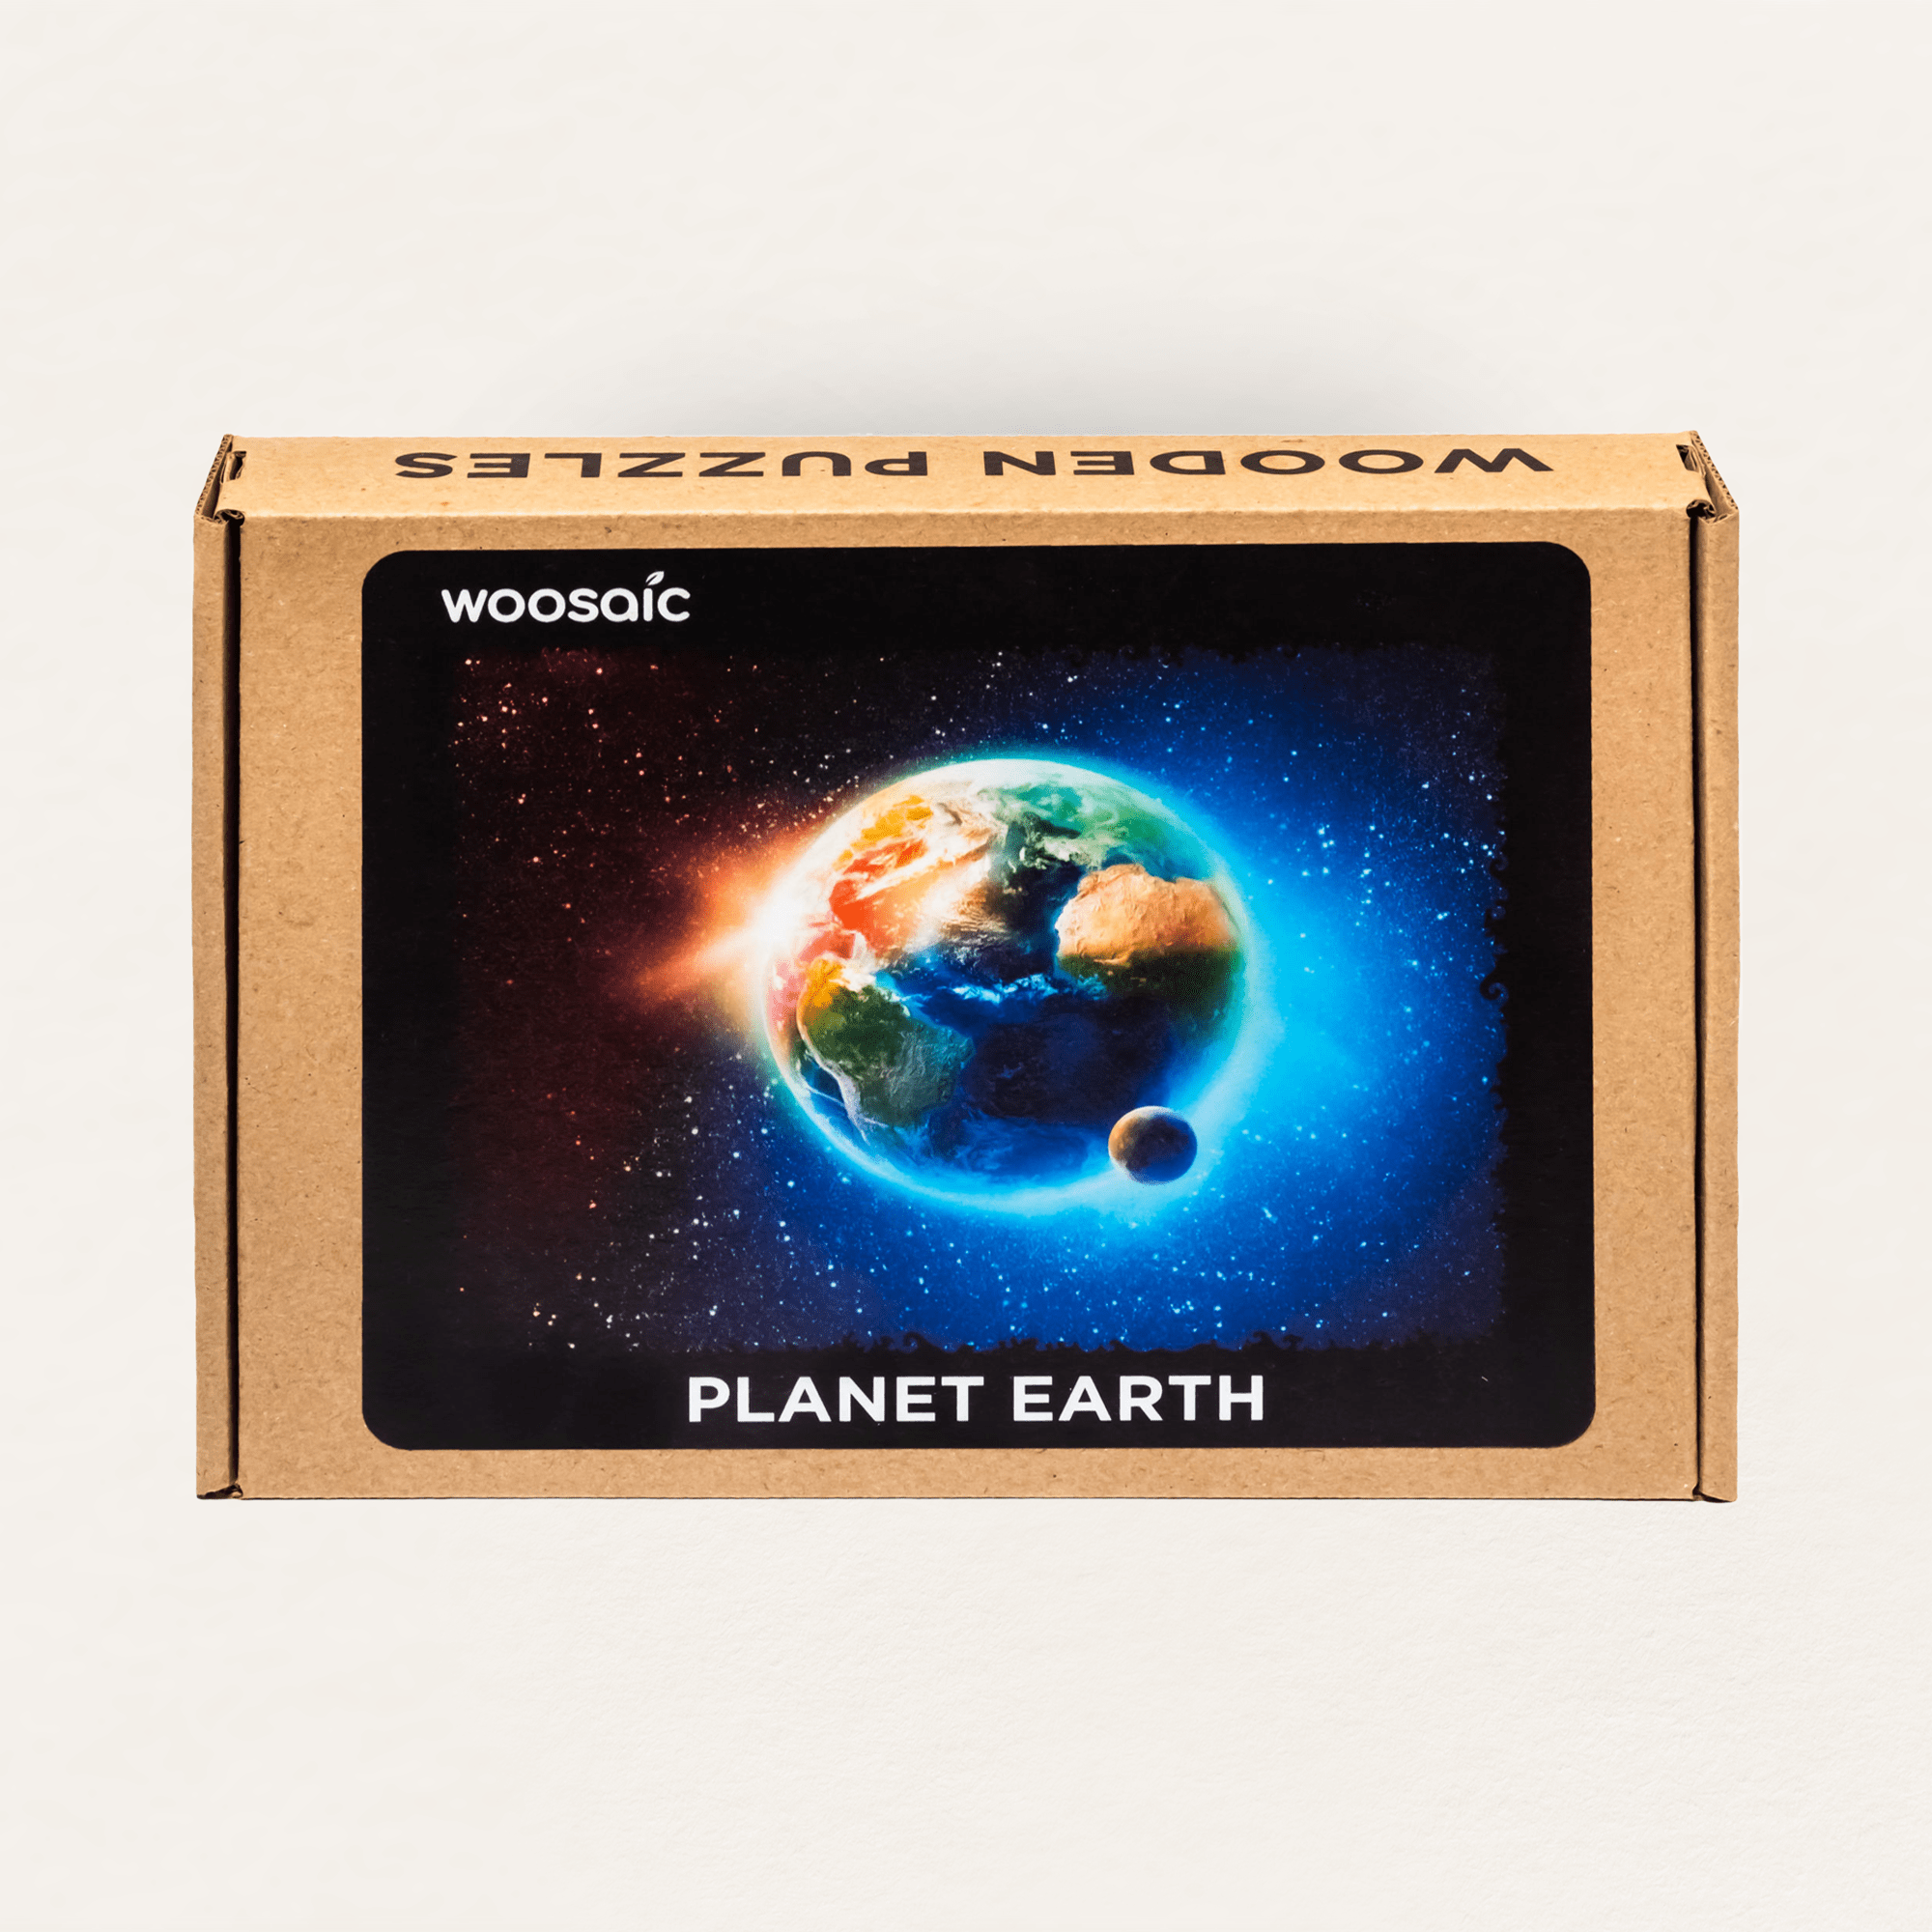 WOOSAIC Planet Earth Limited Edition